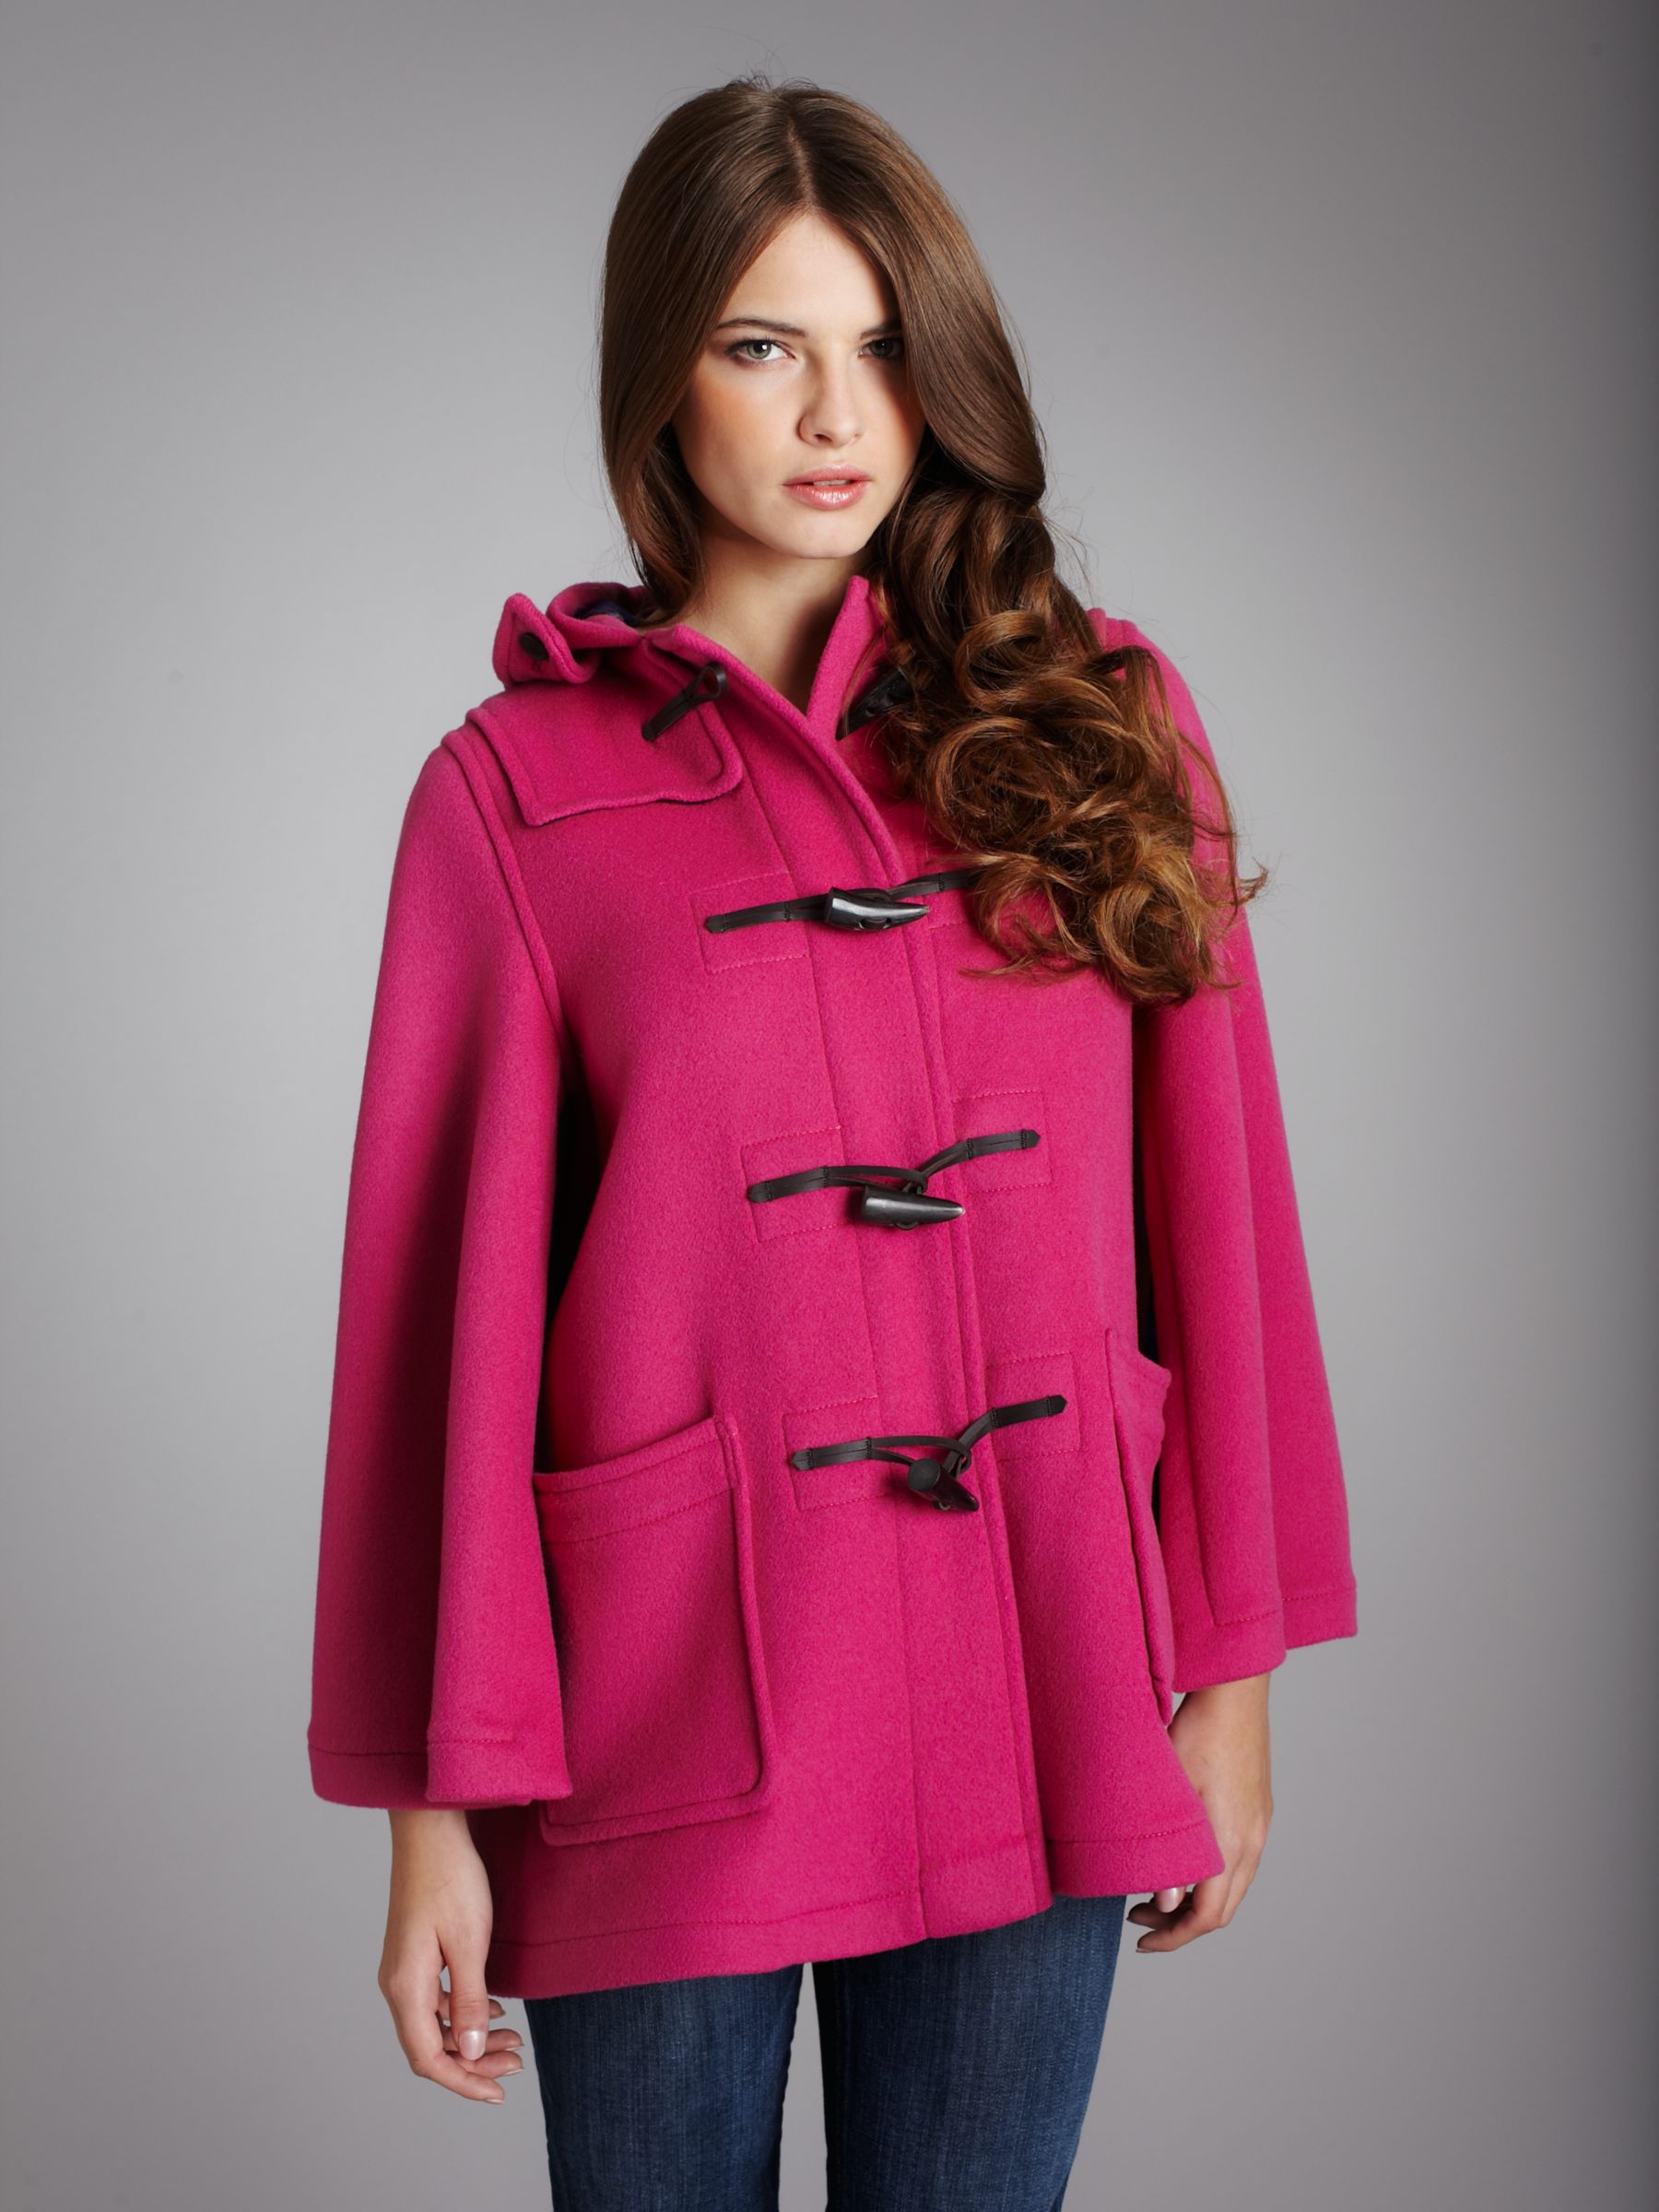 Gloverall Duffle Cape Coat, Pink at John Lewis